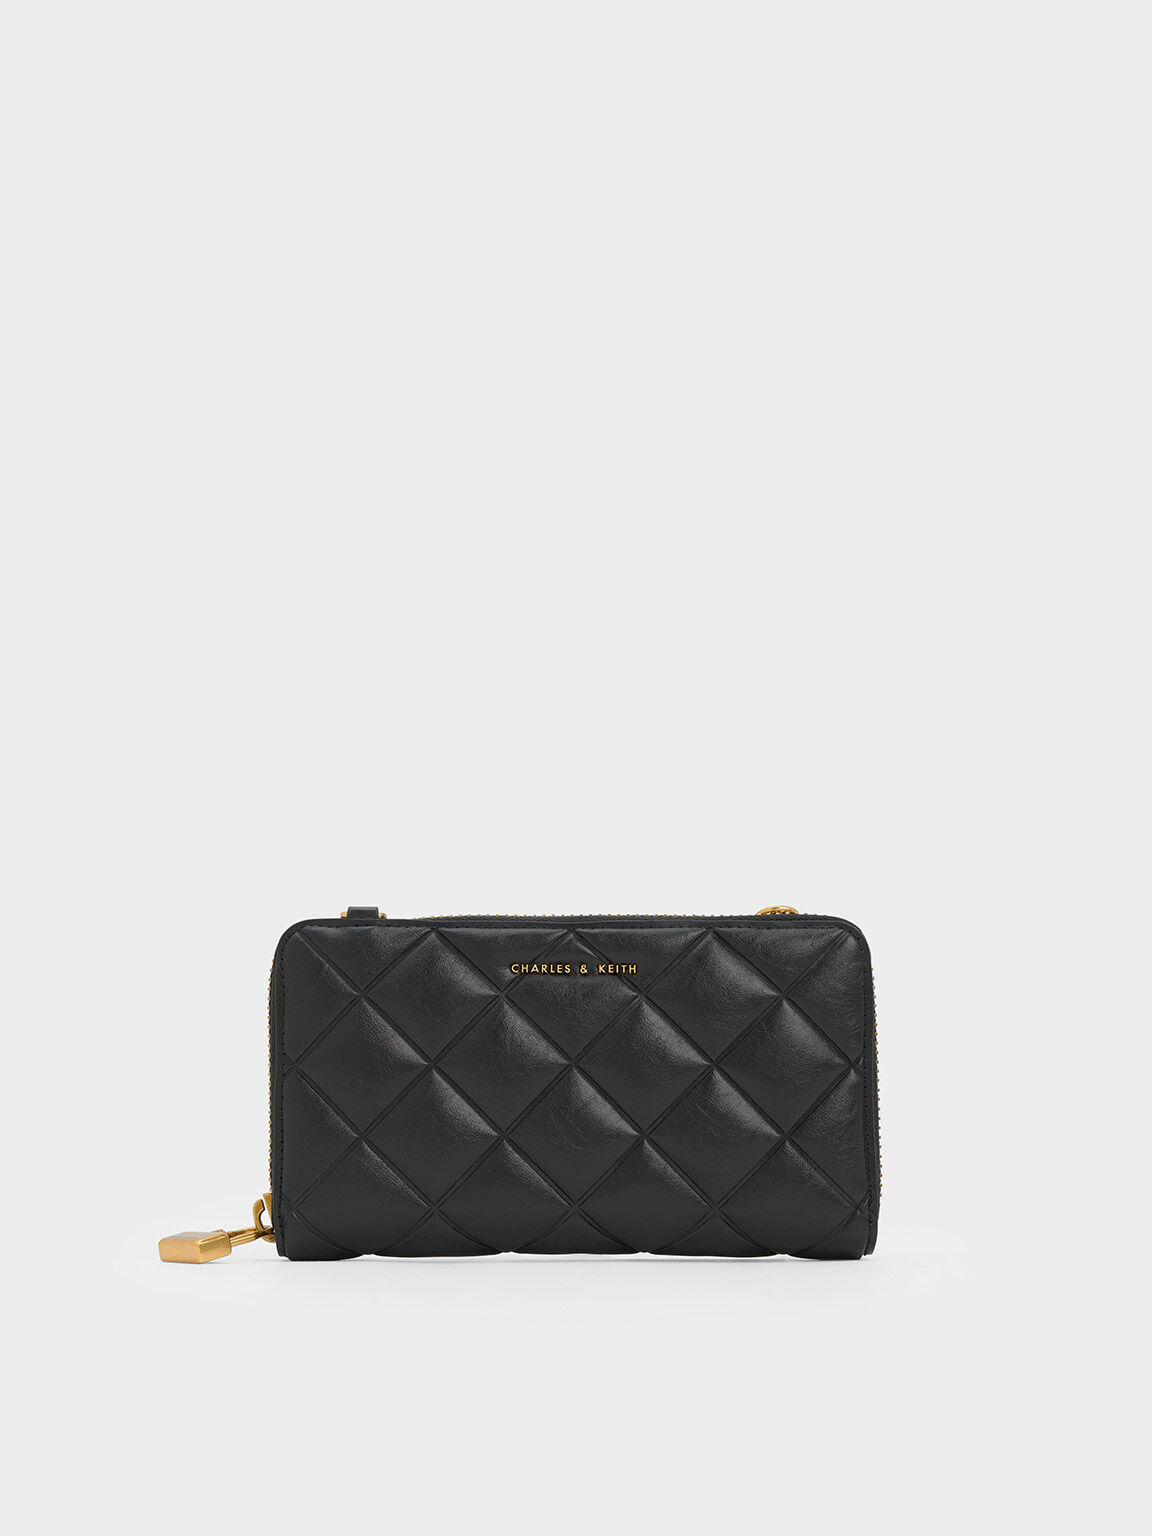 Charles & Keith Women's Quilted Long Wallet